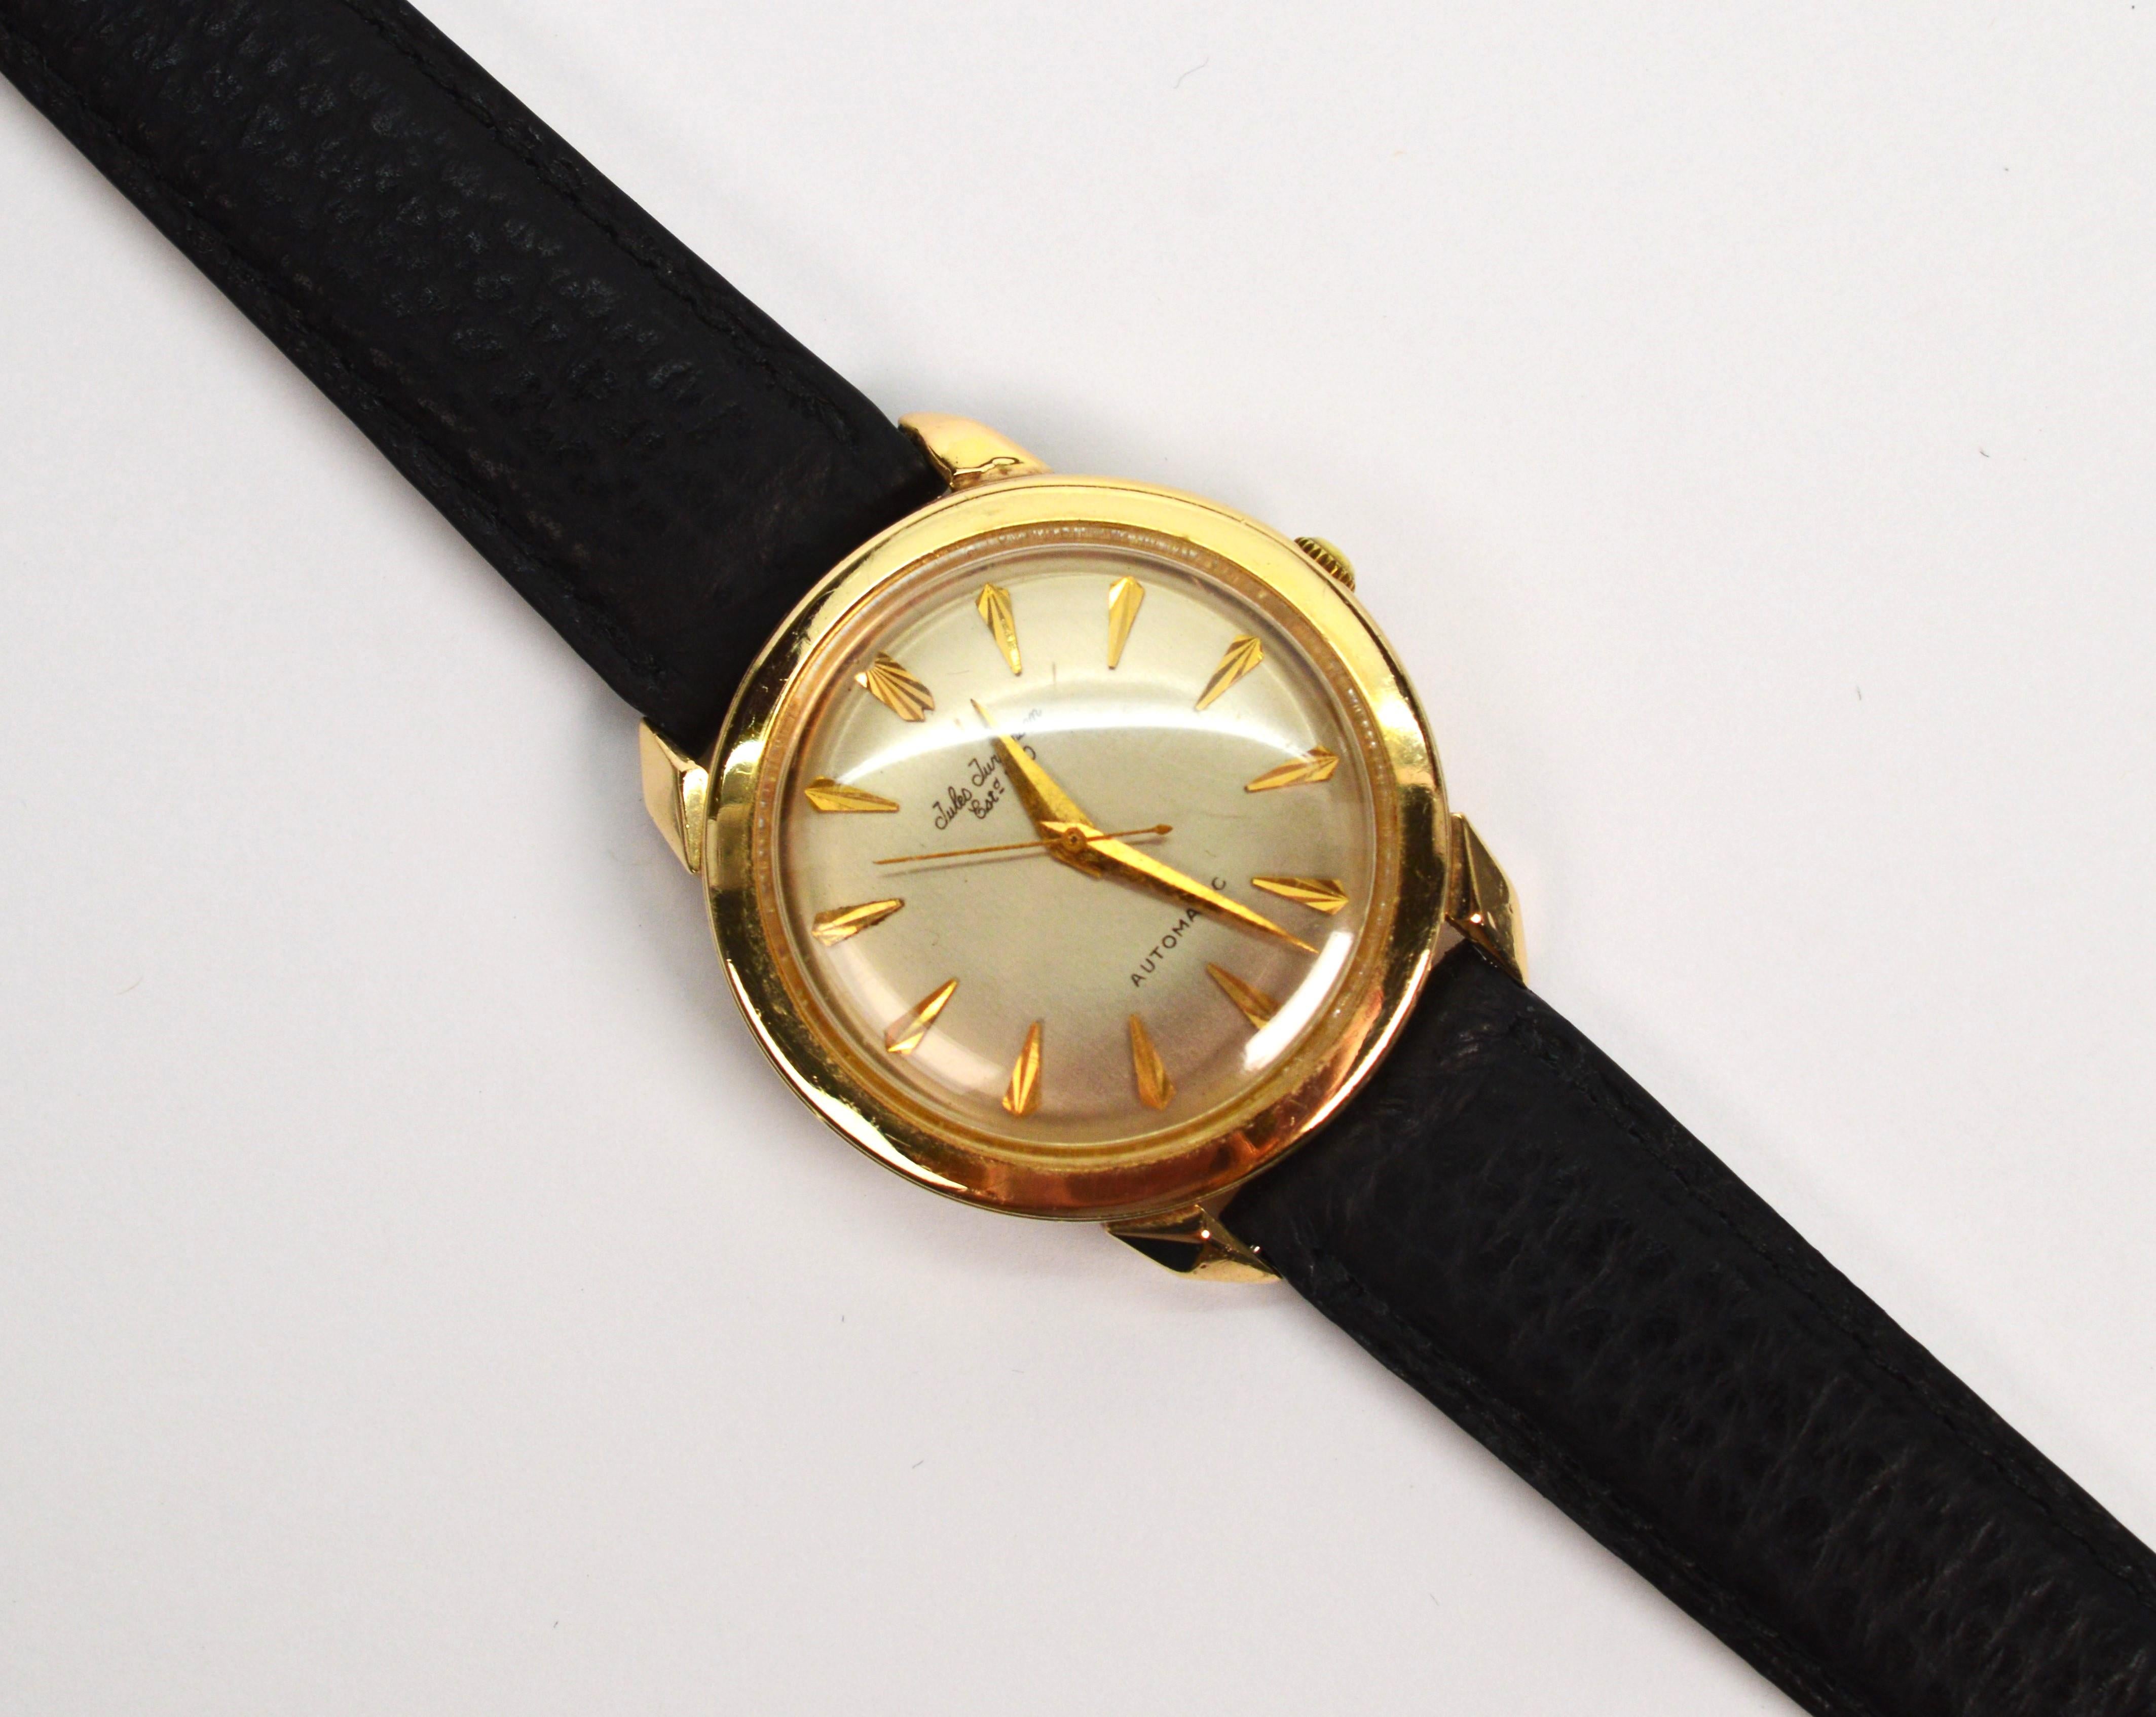 Quintessential 1950's styling by well known Swiss Watch Company, Jules Jurgensen. This 34mm 14 karat yellow gold retro beauty has an automatic 17 jewel movement, serial number 300354. The round case number is 394428 and the dial is silver toned with